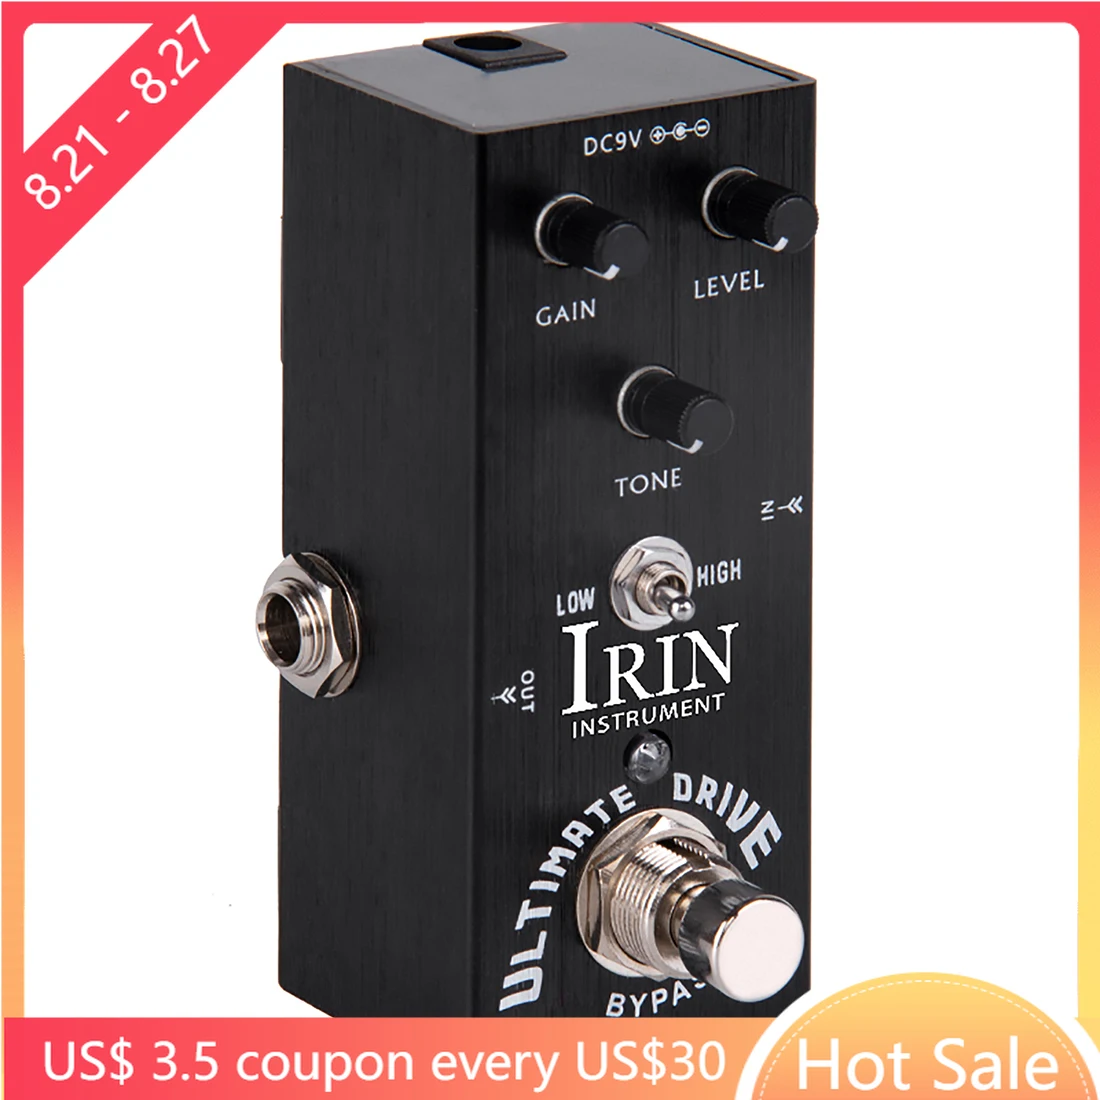 

IRIN AN-11 Ultimate Drive Guitar Overdrive Distortion Effect Pedal Bordering-on-Distortion Overdrive True Bypass for Guitar